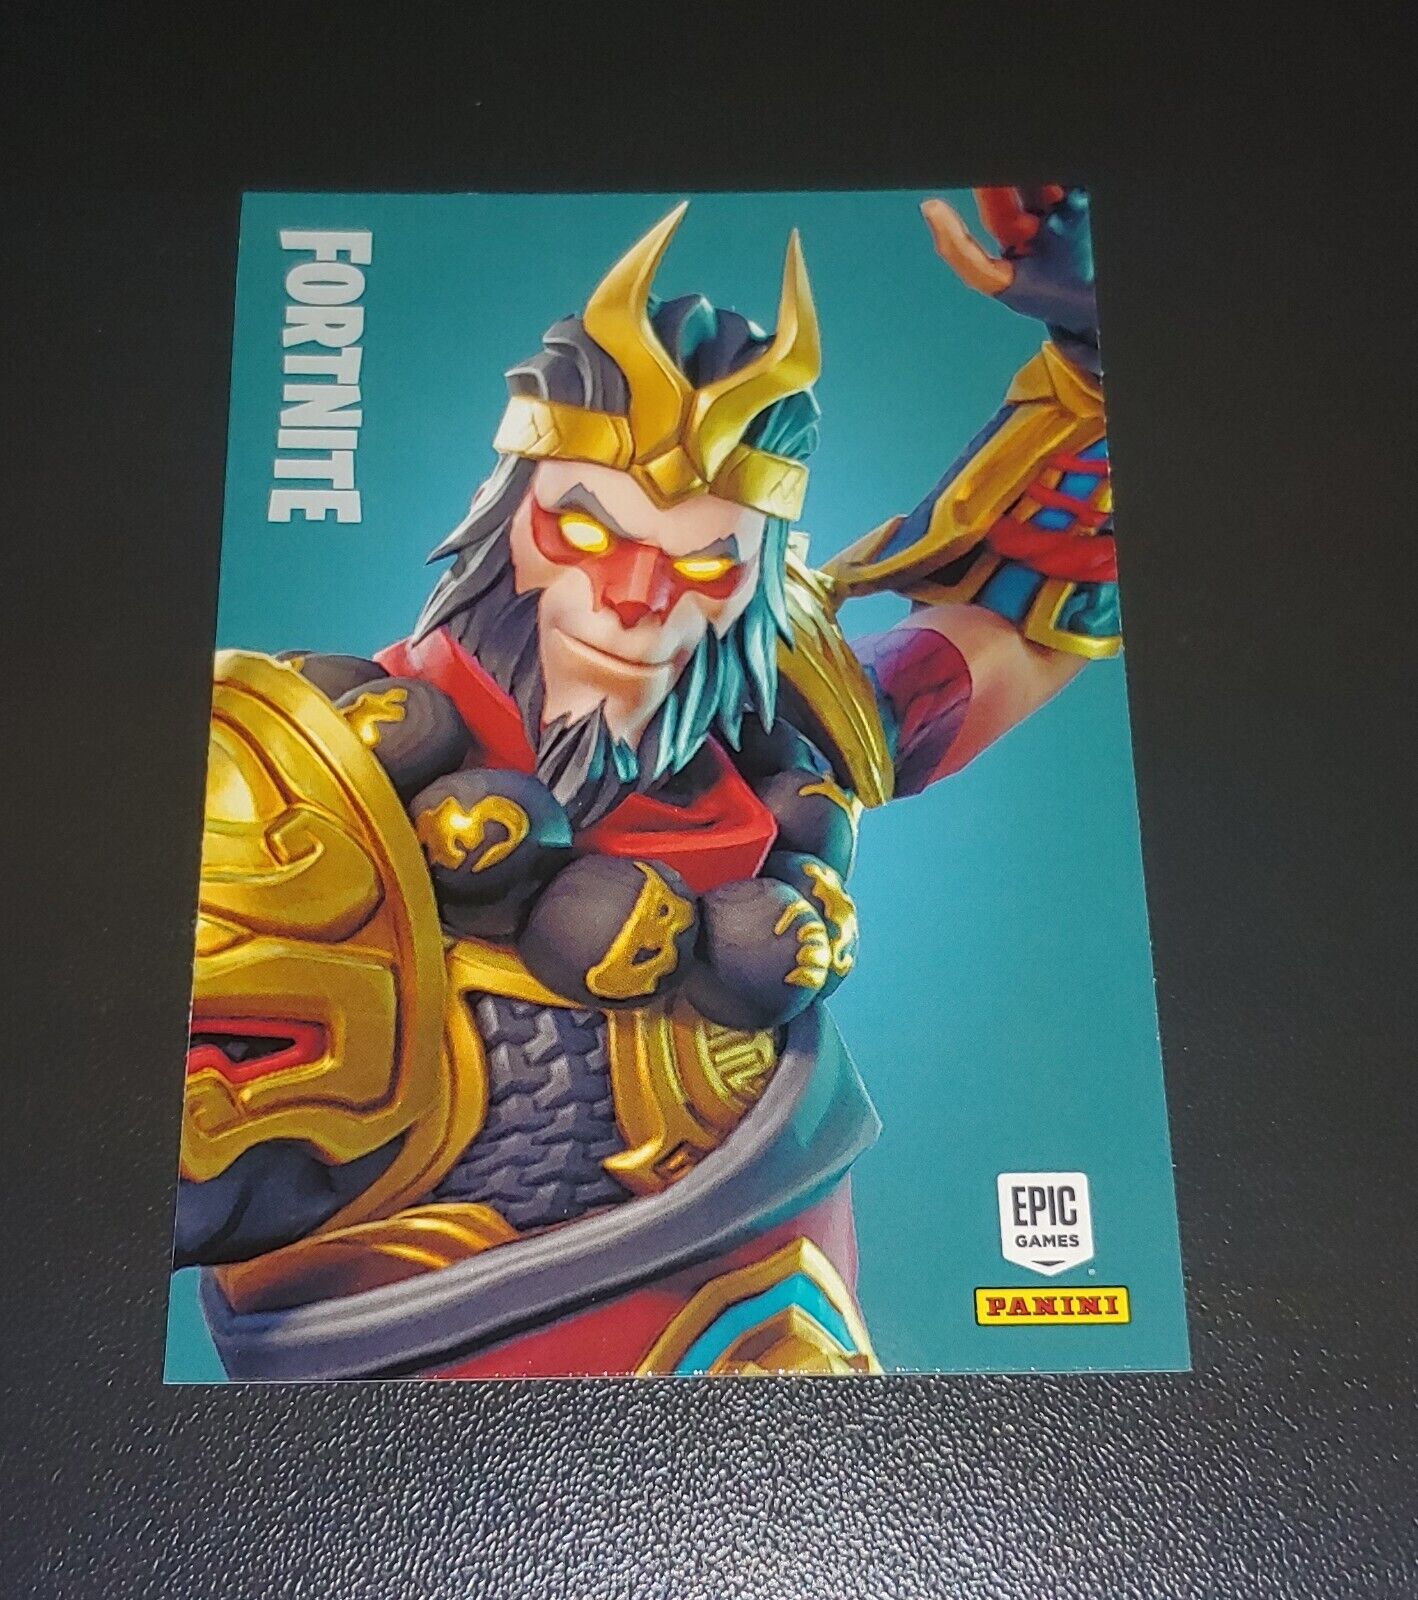 2019 Panini Fortnite Series 1 Wukong #299 Legendary Outfit